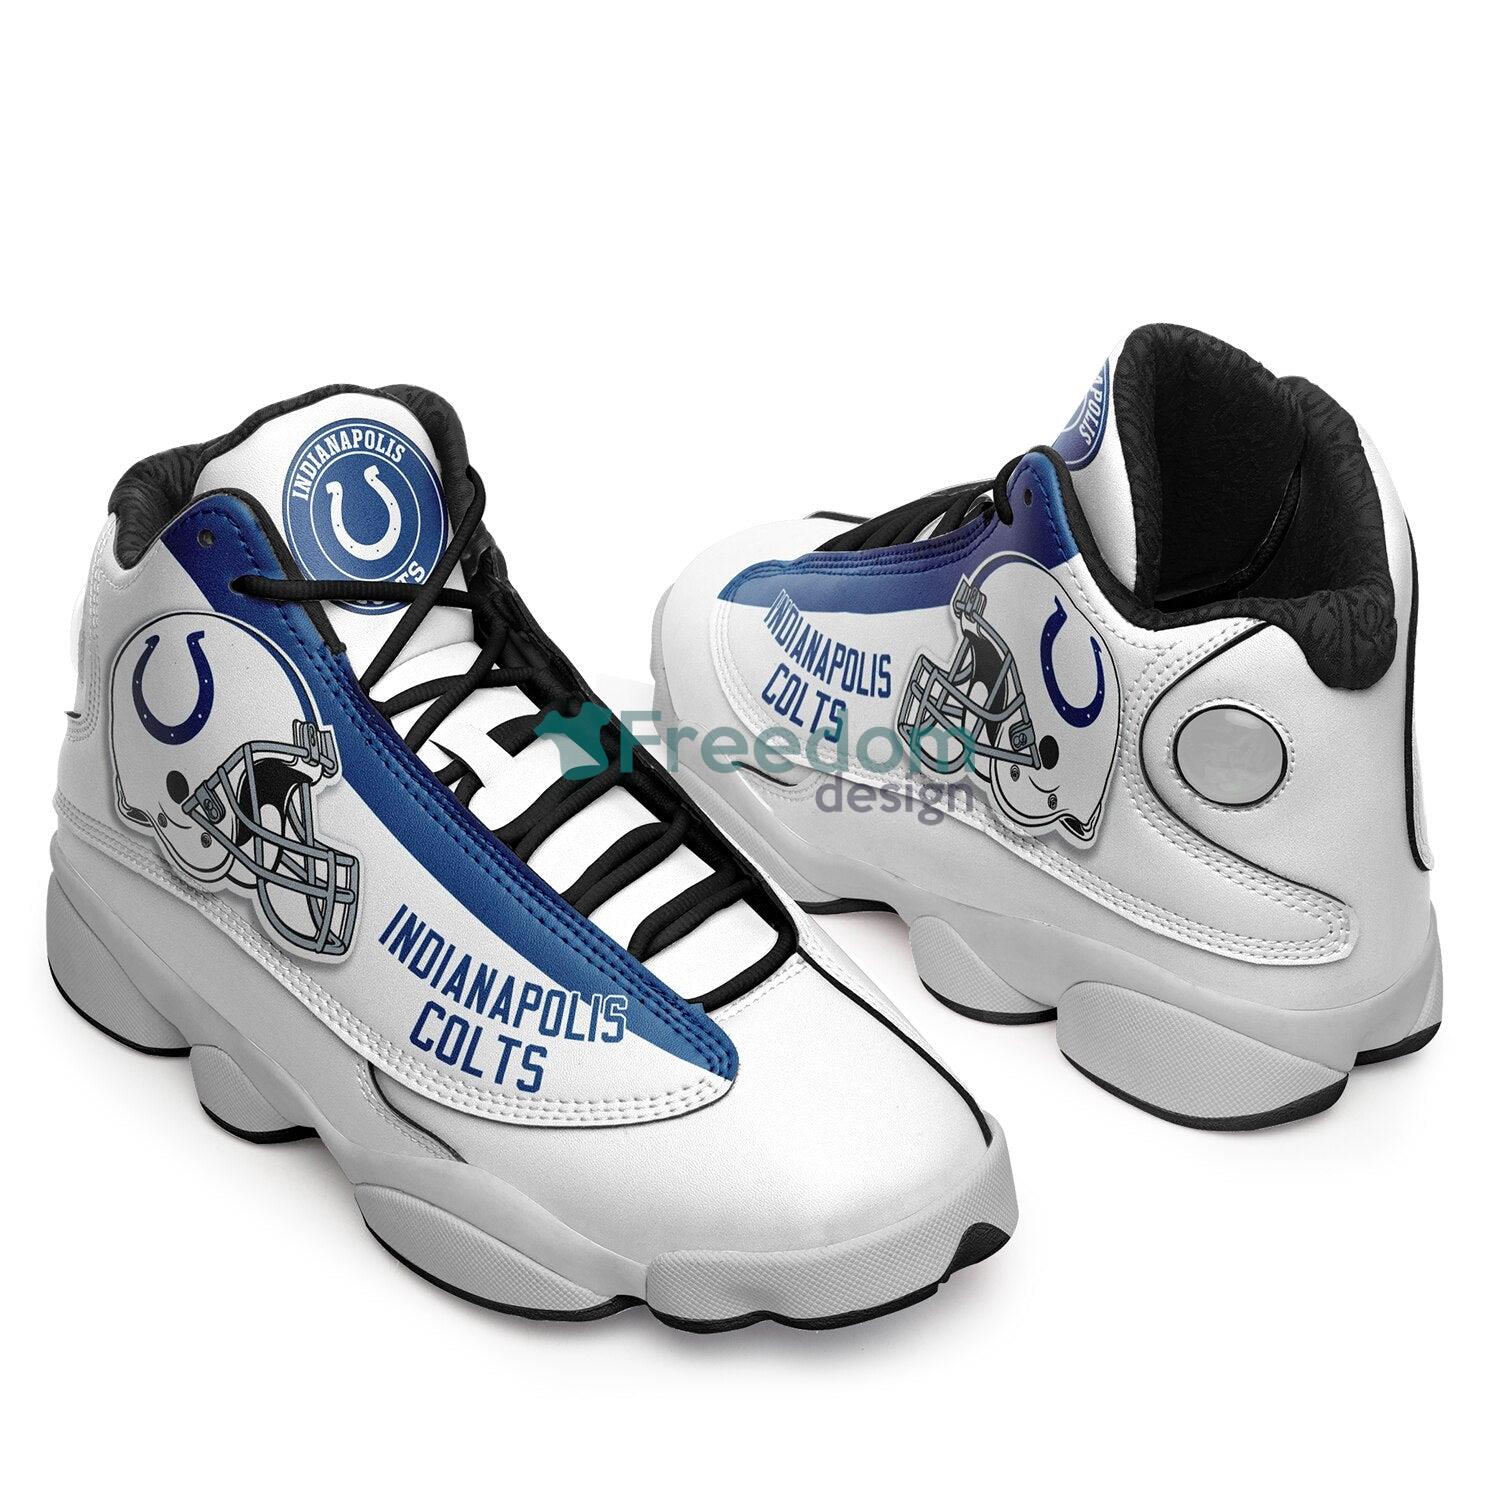 Indianapolis Colts Team White Air Jordan 13 Sneaker Shoes For Fans